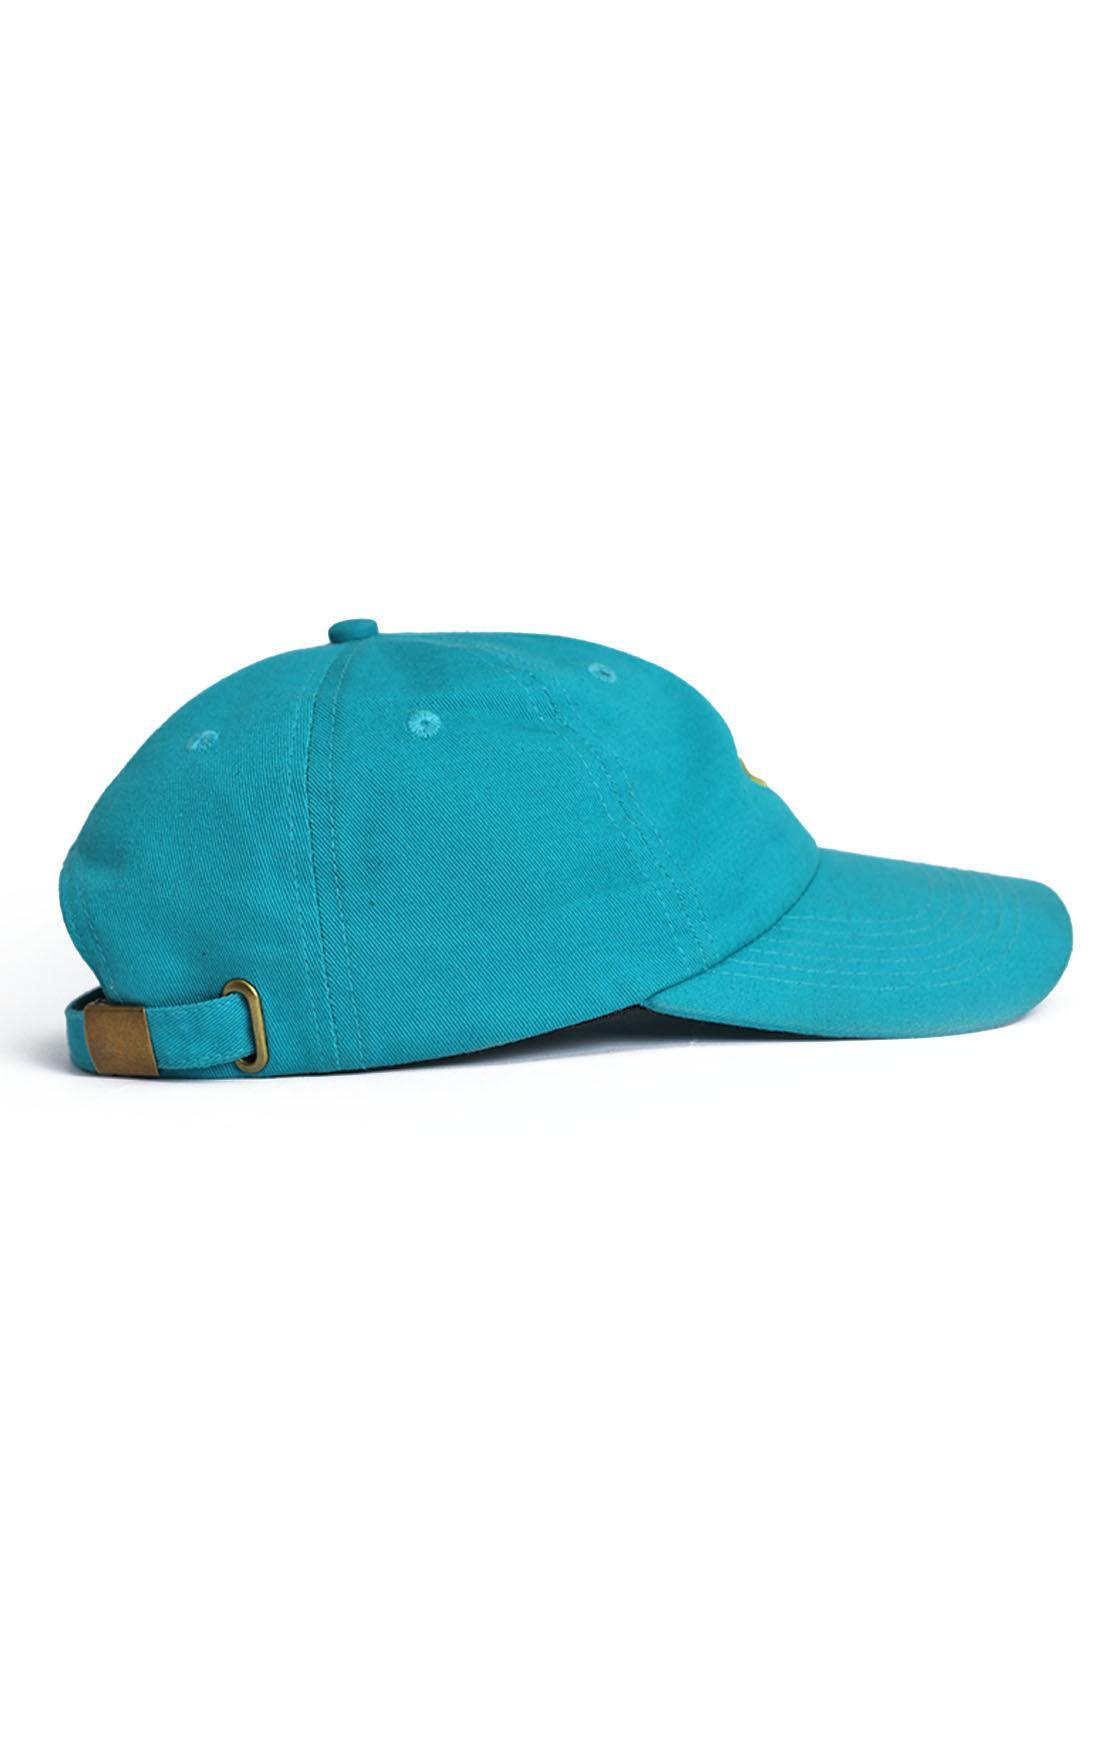 OLLYS. Teal Cotton Cap with Lime Logo - Elsie & Fred